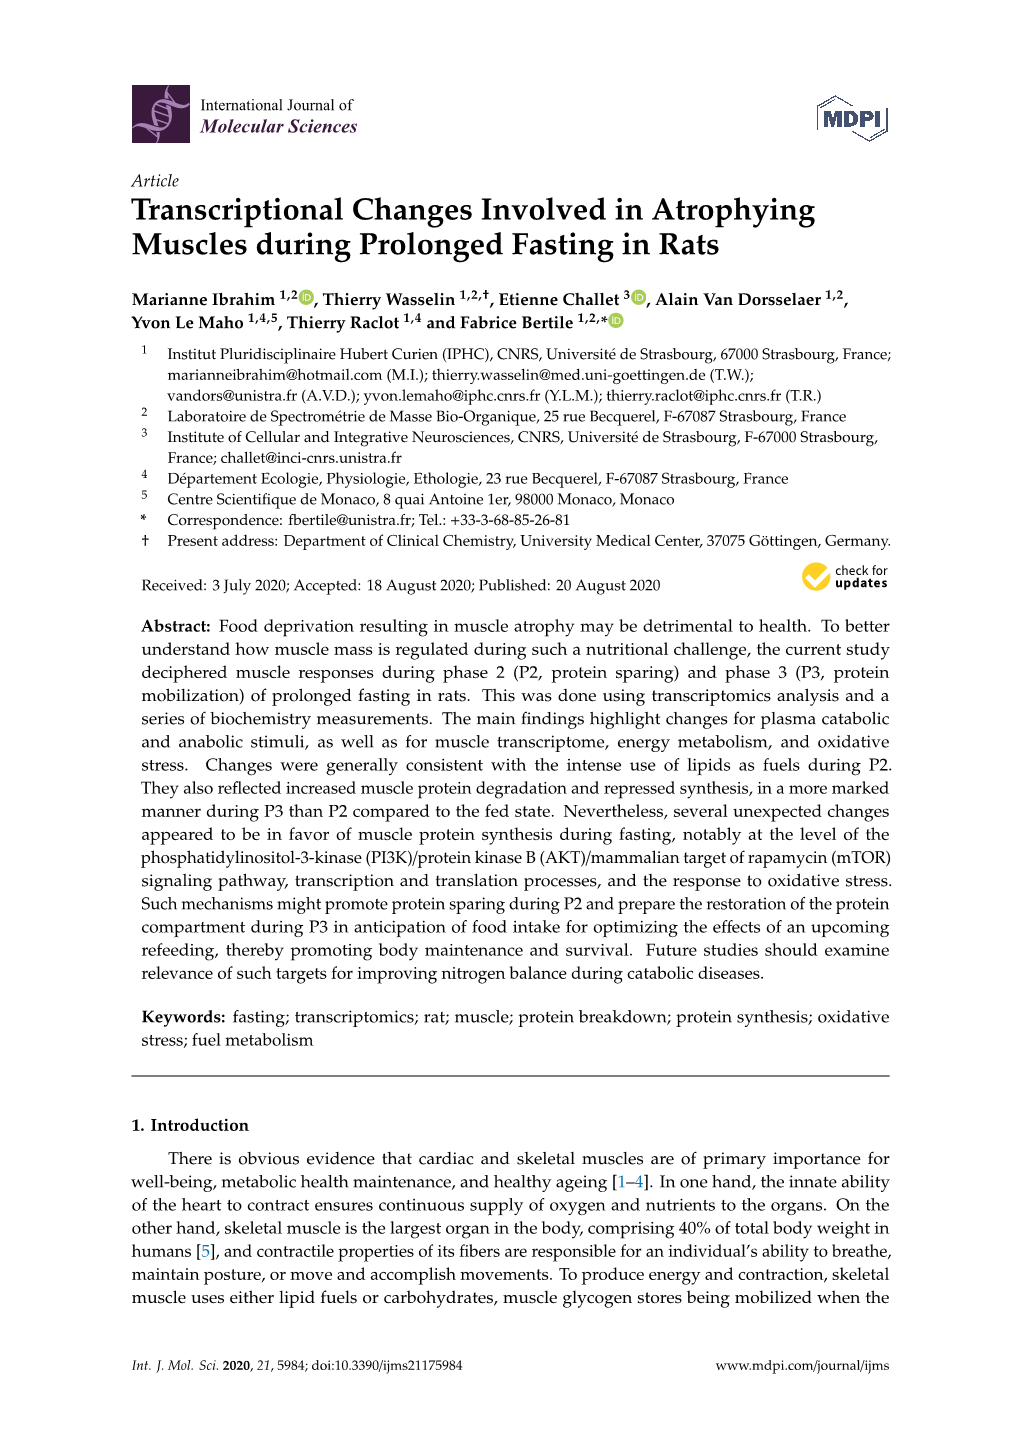 Transcriptional Changes Involved in Atrophying Muscles During Prolonged Fasting in Rats